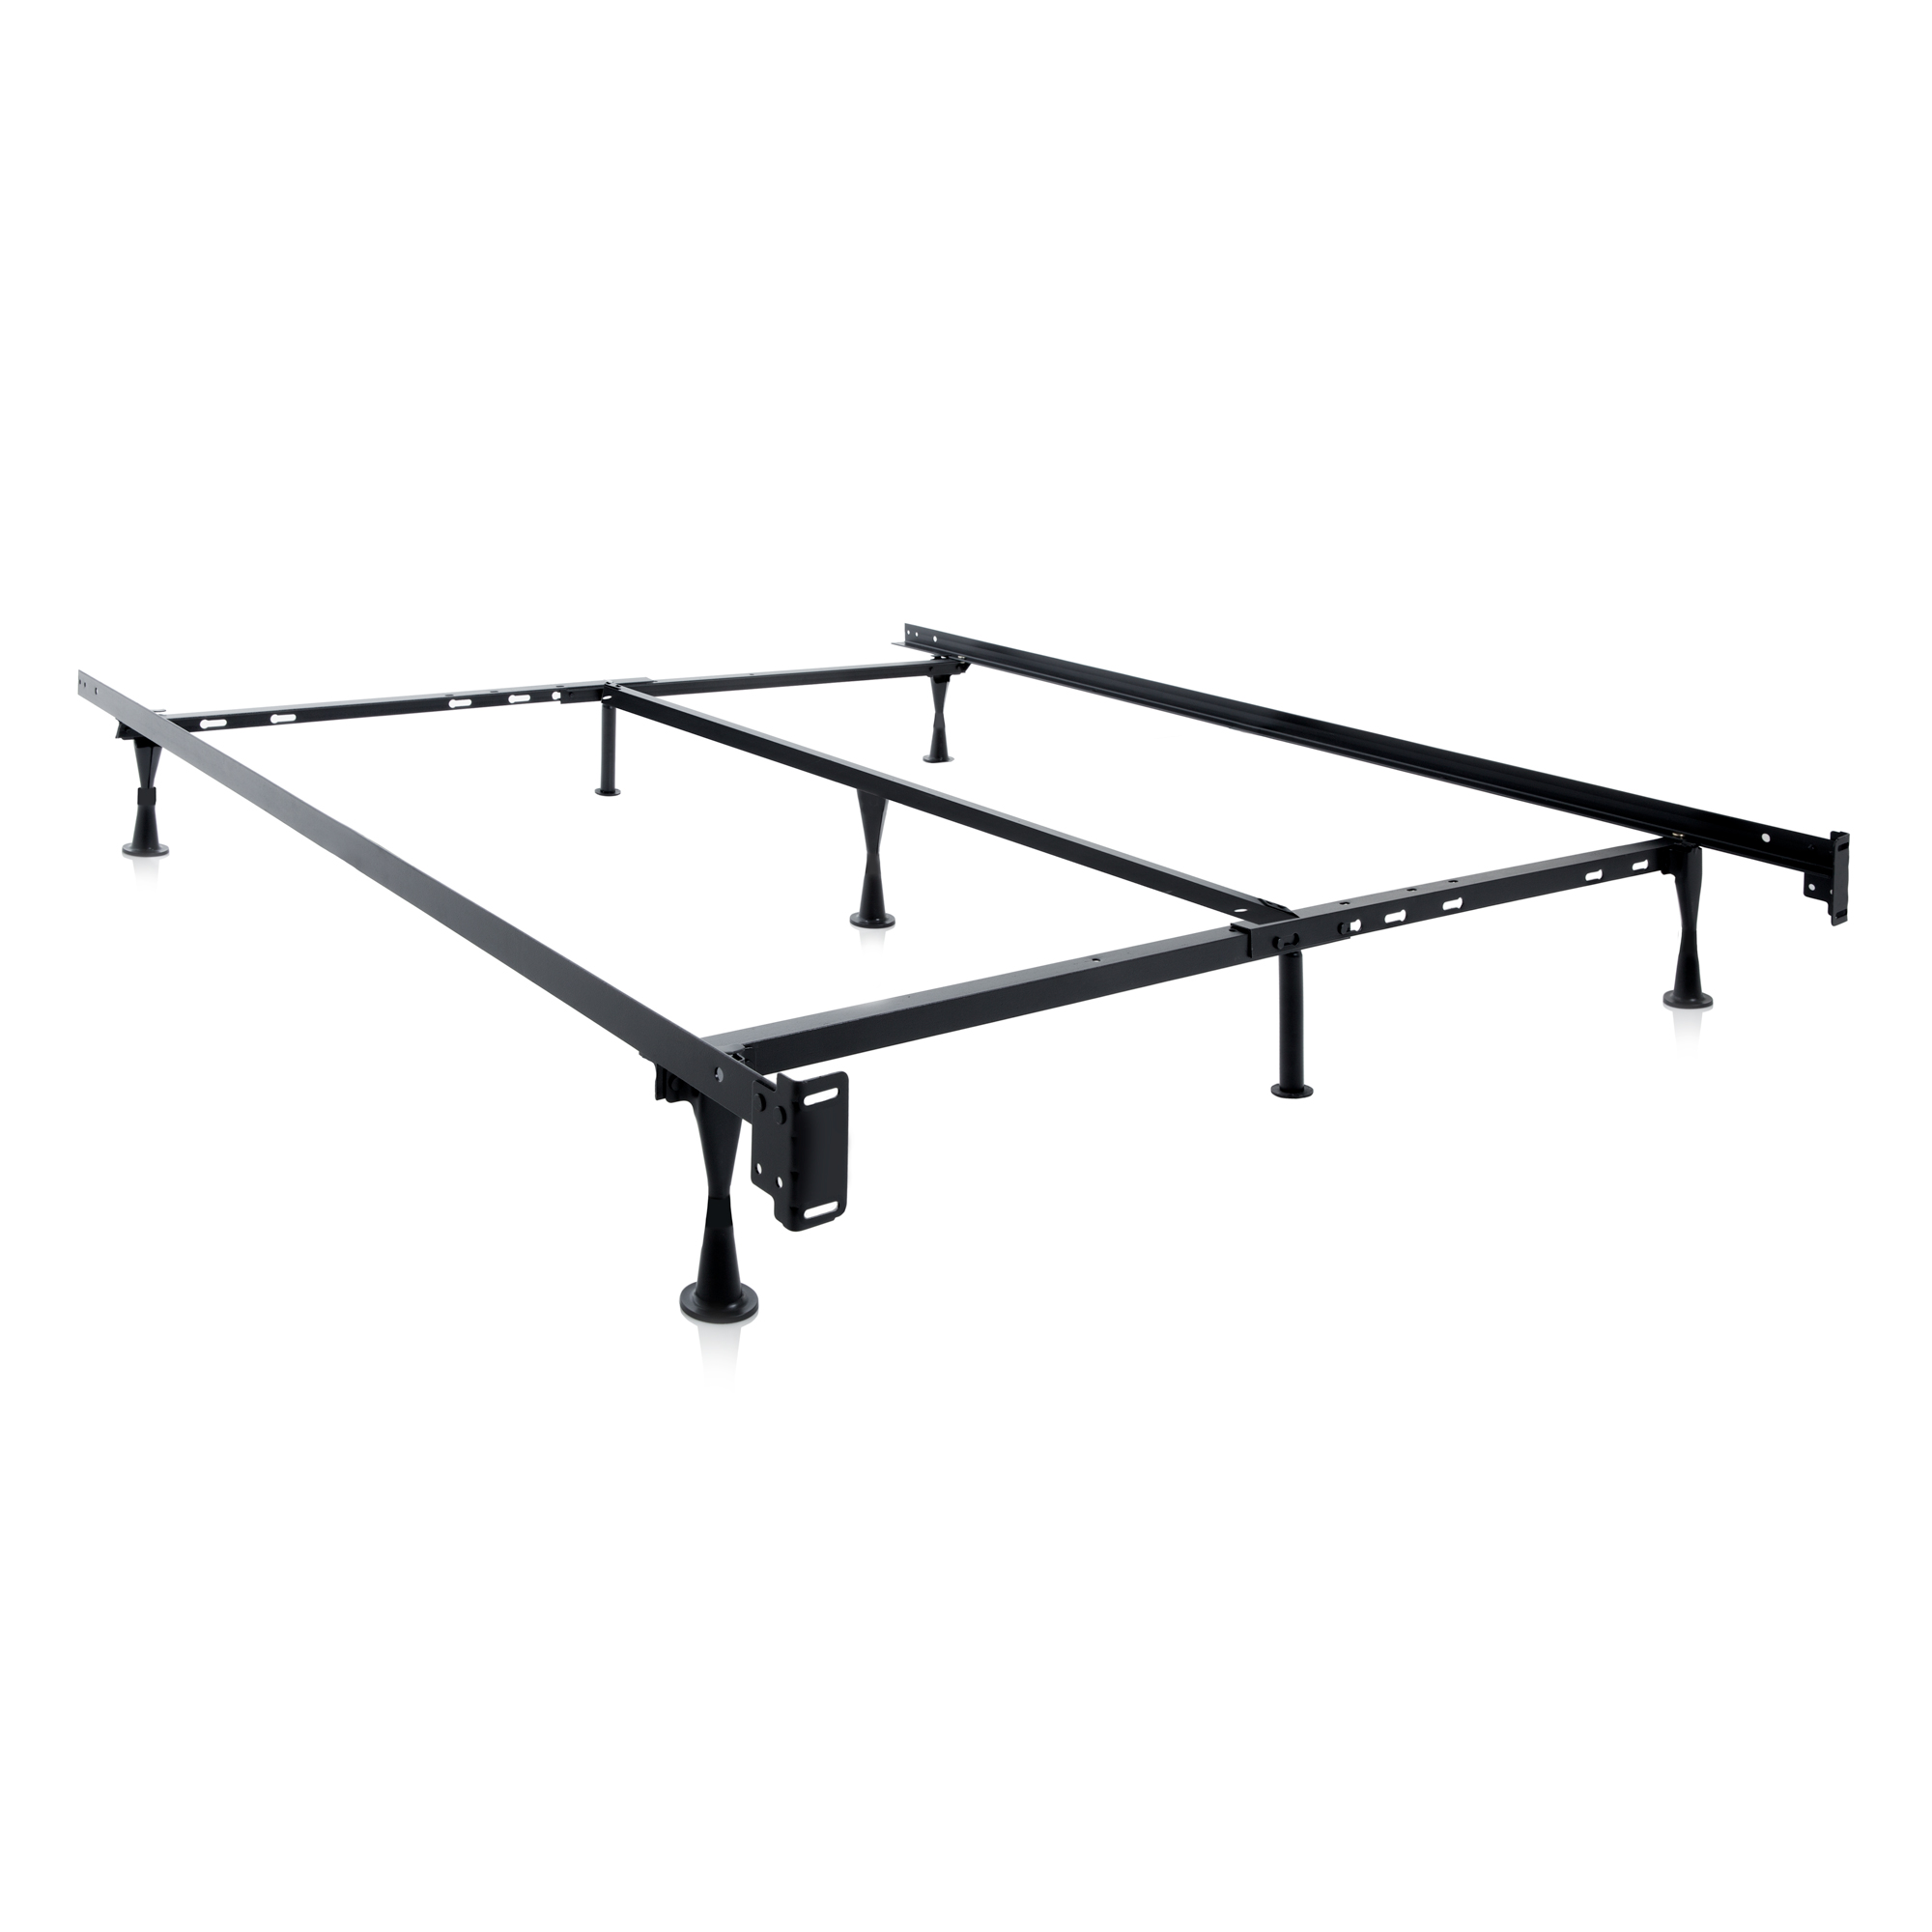 Structures Metal Adjustable Bed Frame, How To Put Together An Adjustable Metal Bed Frame